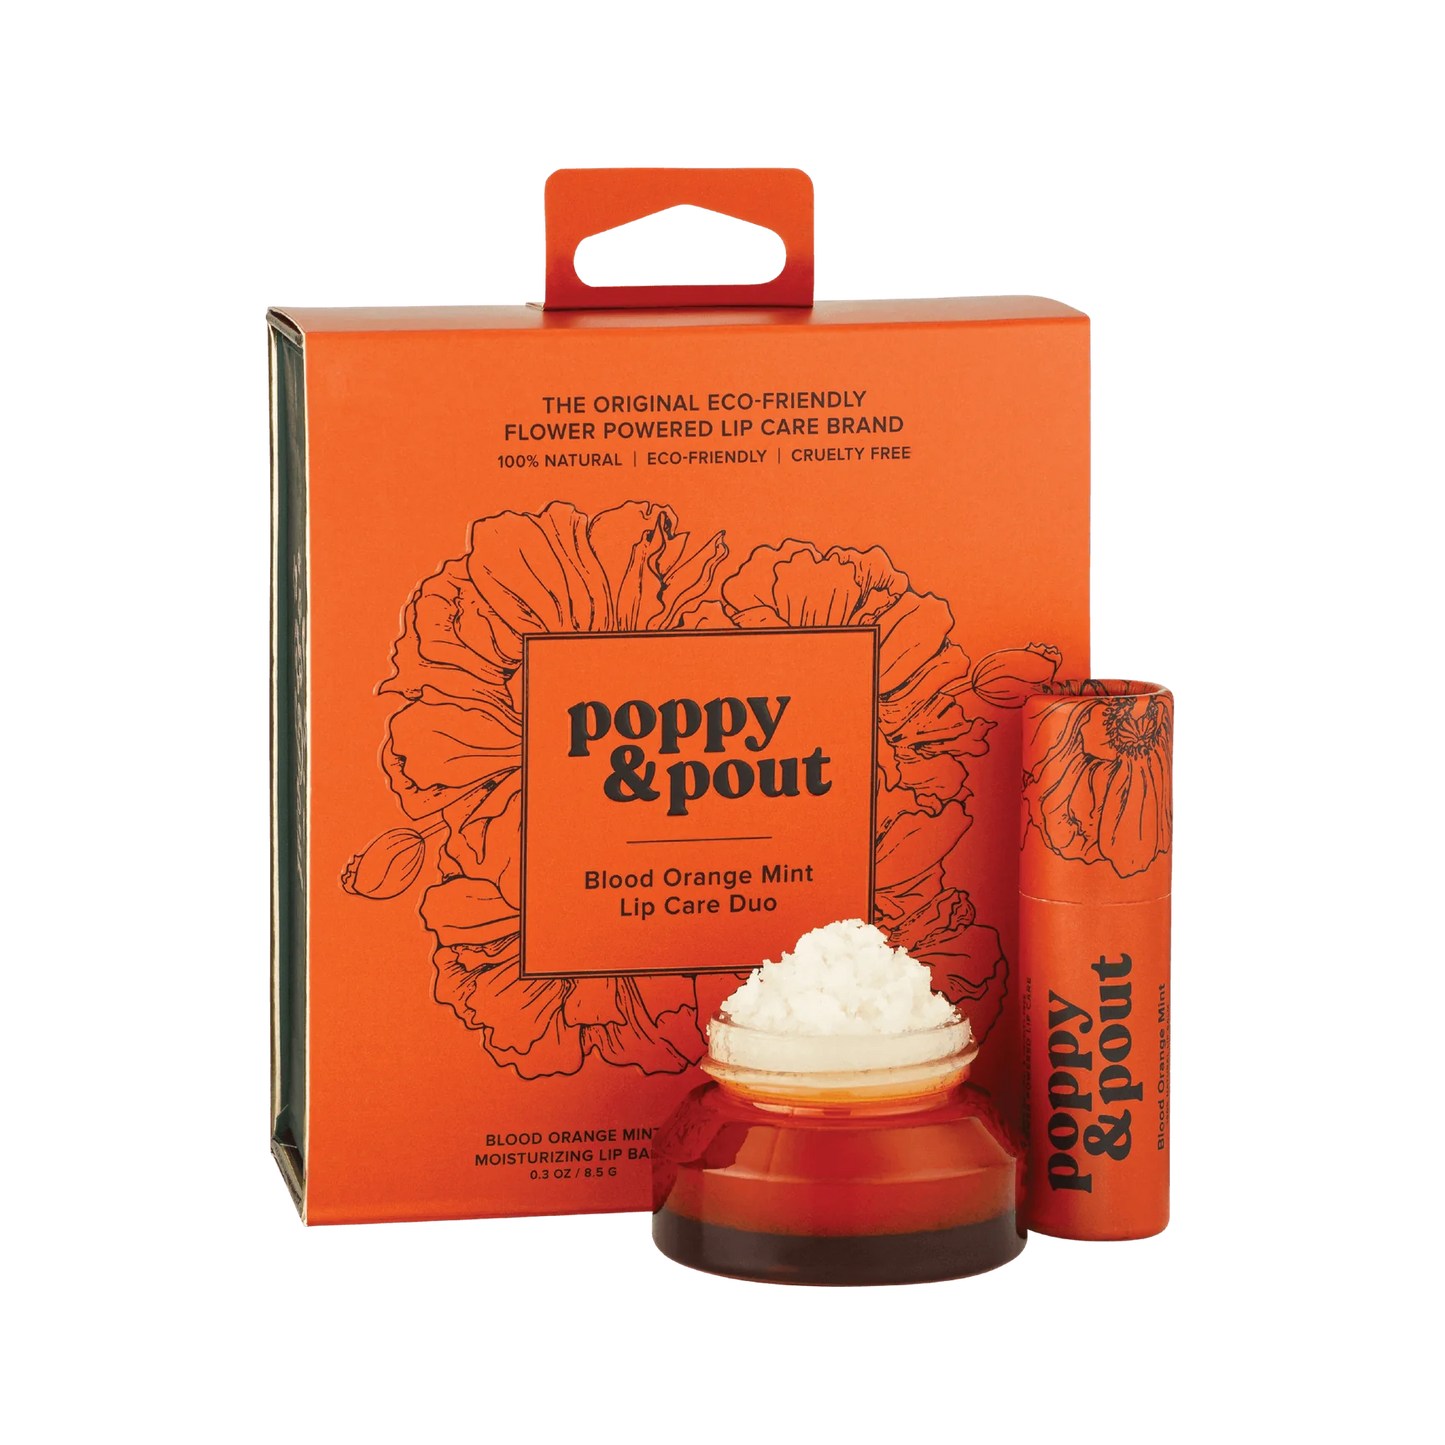 Poppy & Pout Gift Duo Lip Care